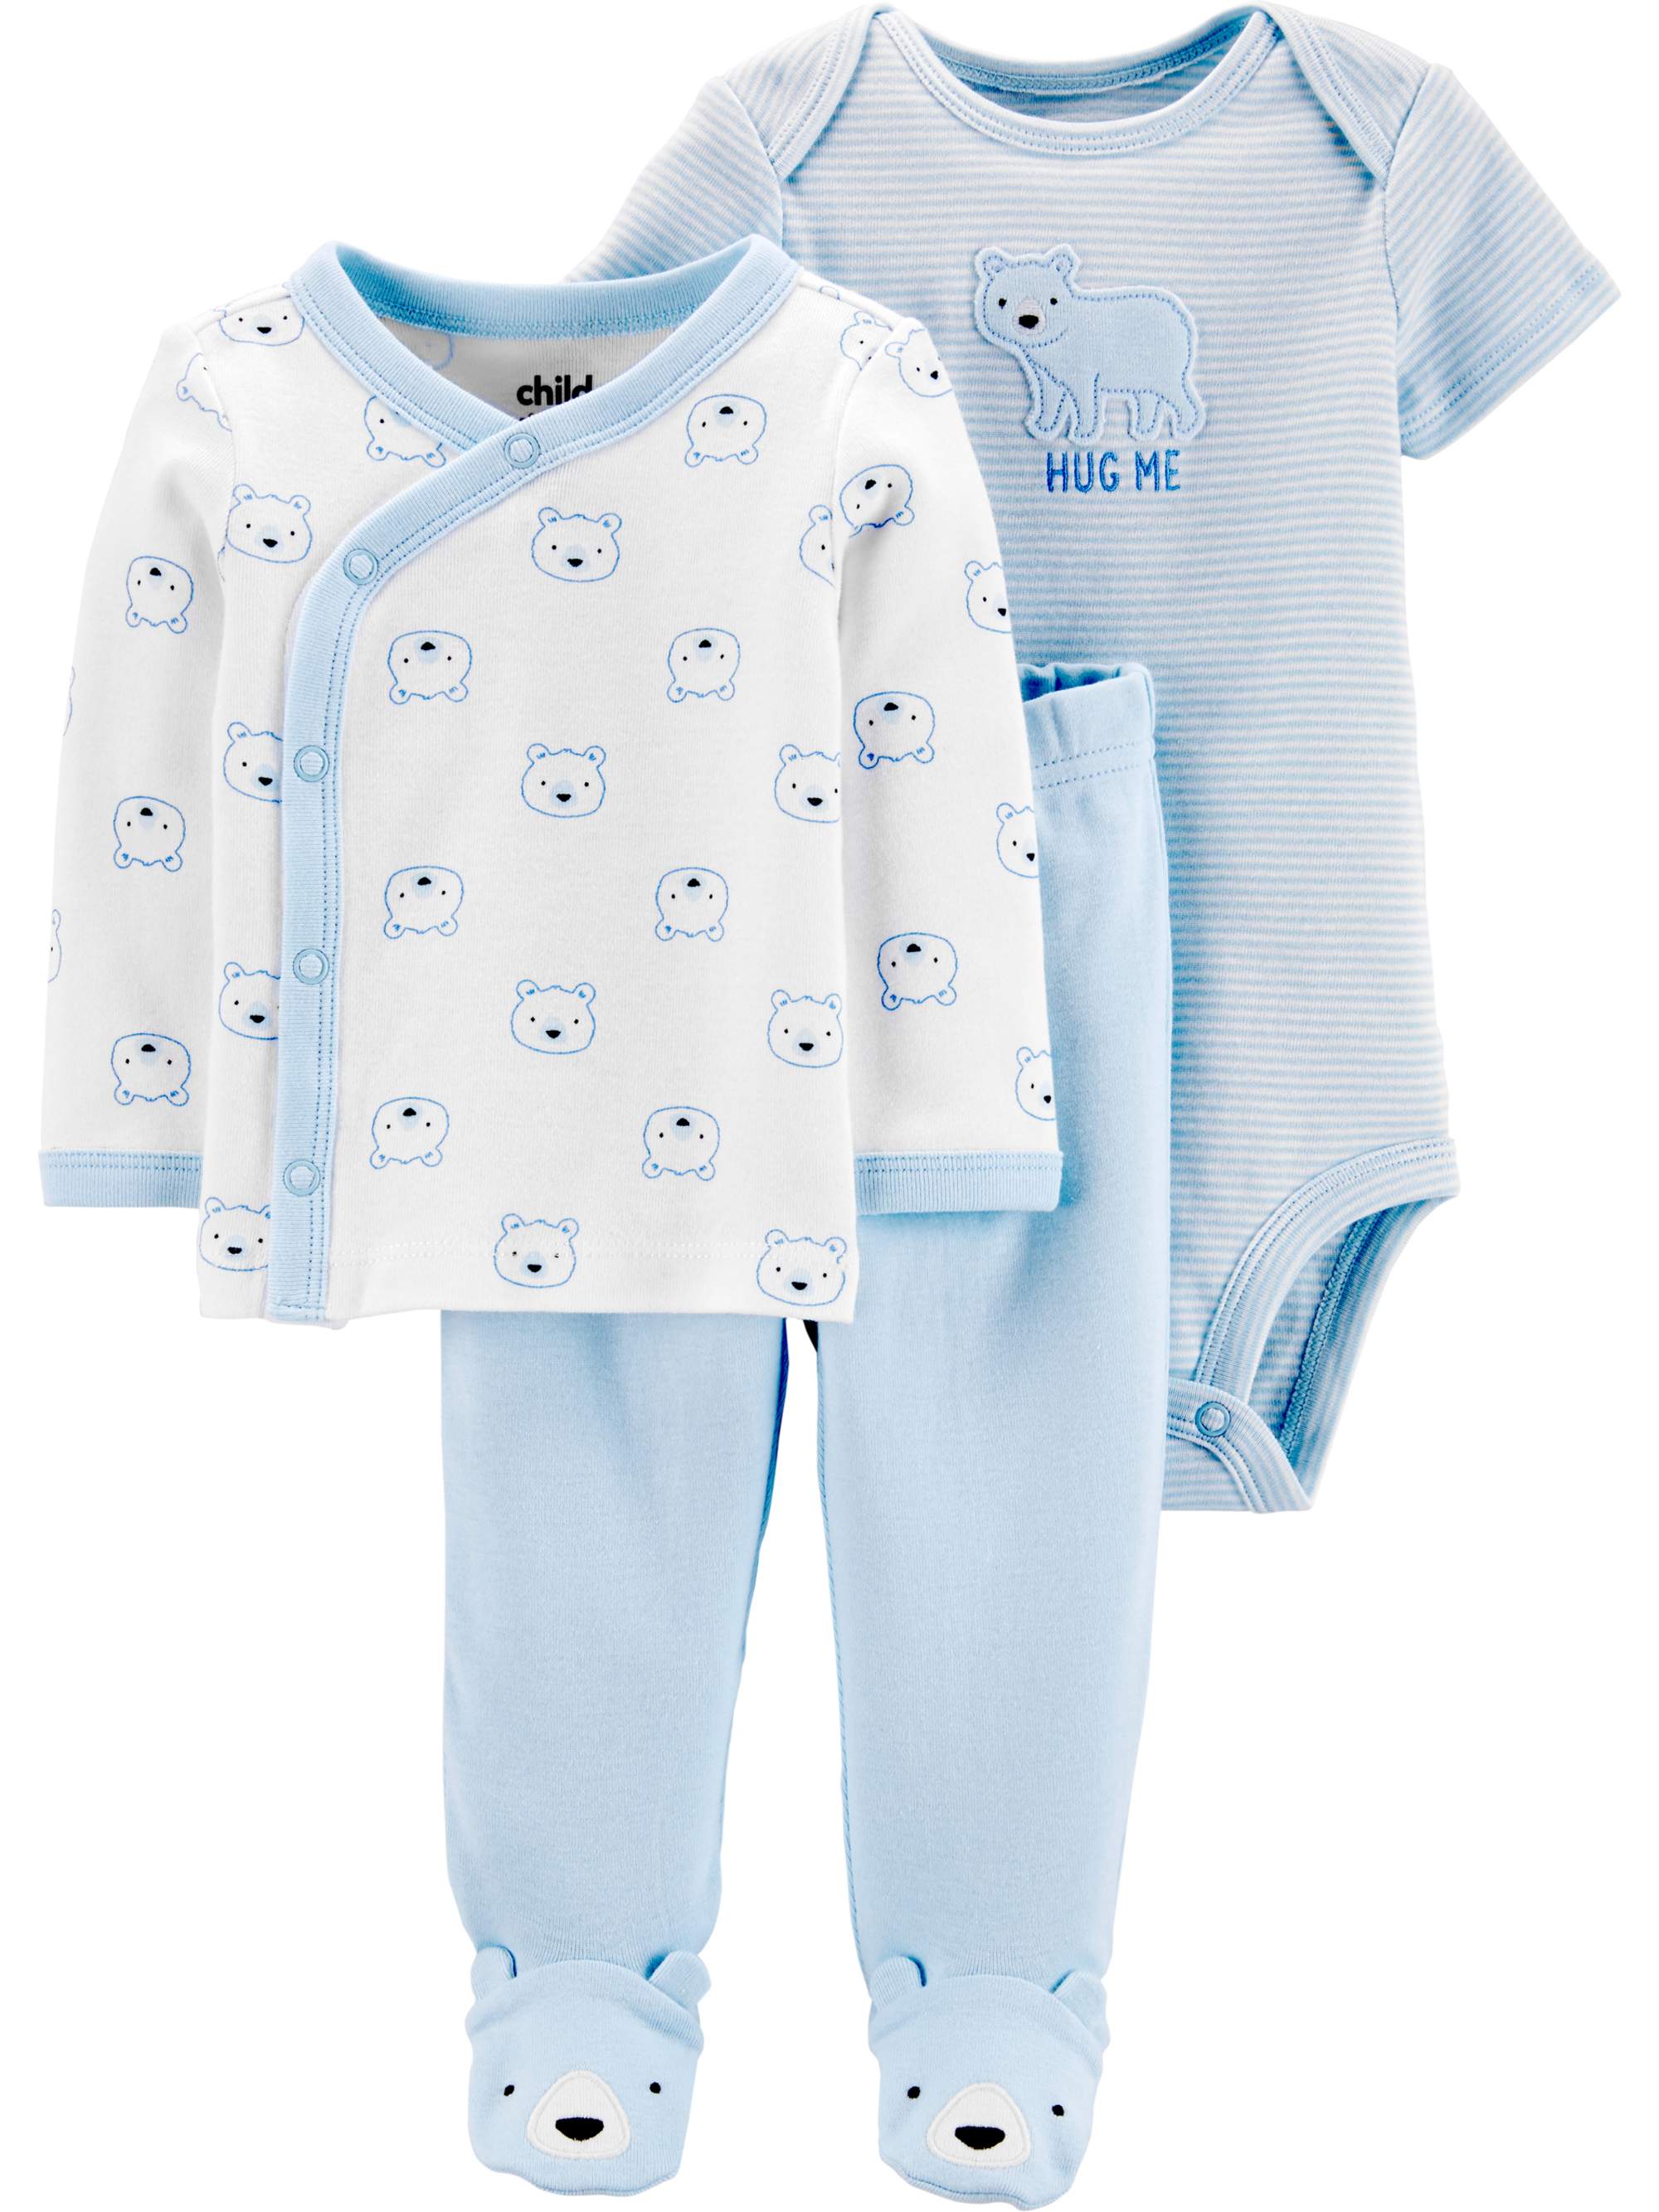 Carter's Child of Mine Baby Boy Outfit Take Me Home, 3-Piece Set - image 1 of 4